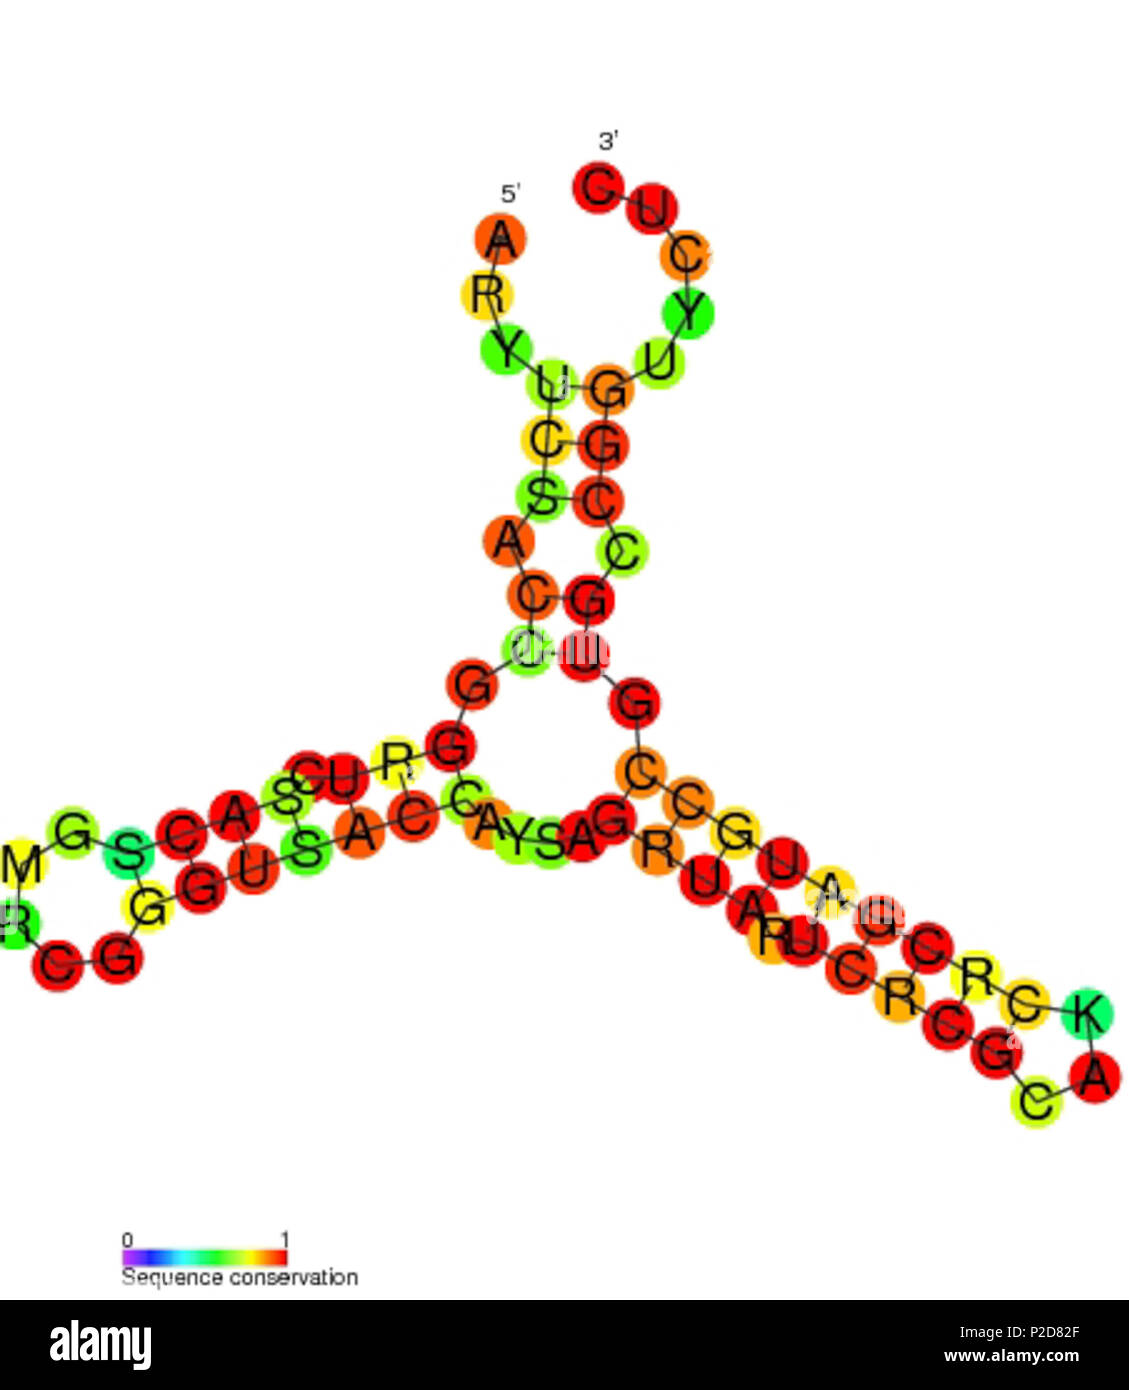 . Secondary structure and sequence conservation image for ASdes non coding RNA (RF01781). Nucleotide colouring indicates sequence conservation between the members of this family. May 2011. Rfam database 5 ASdes secondary structure Stock Photo